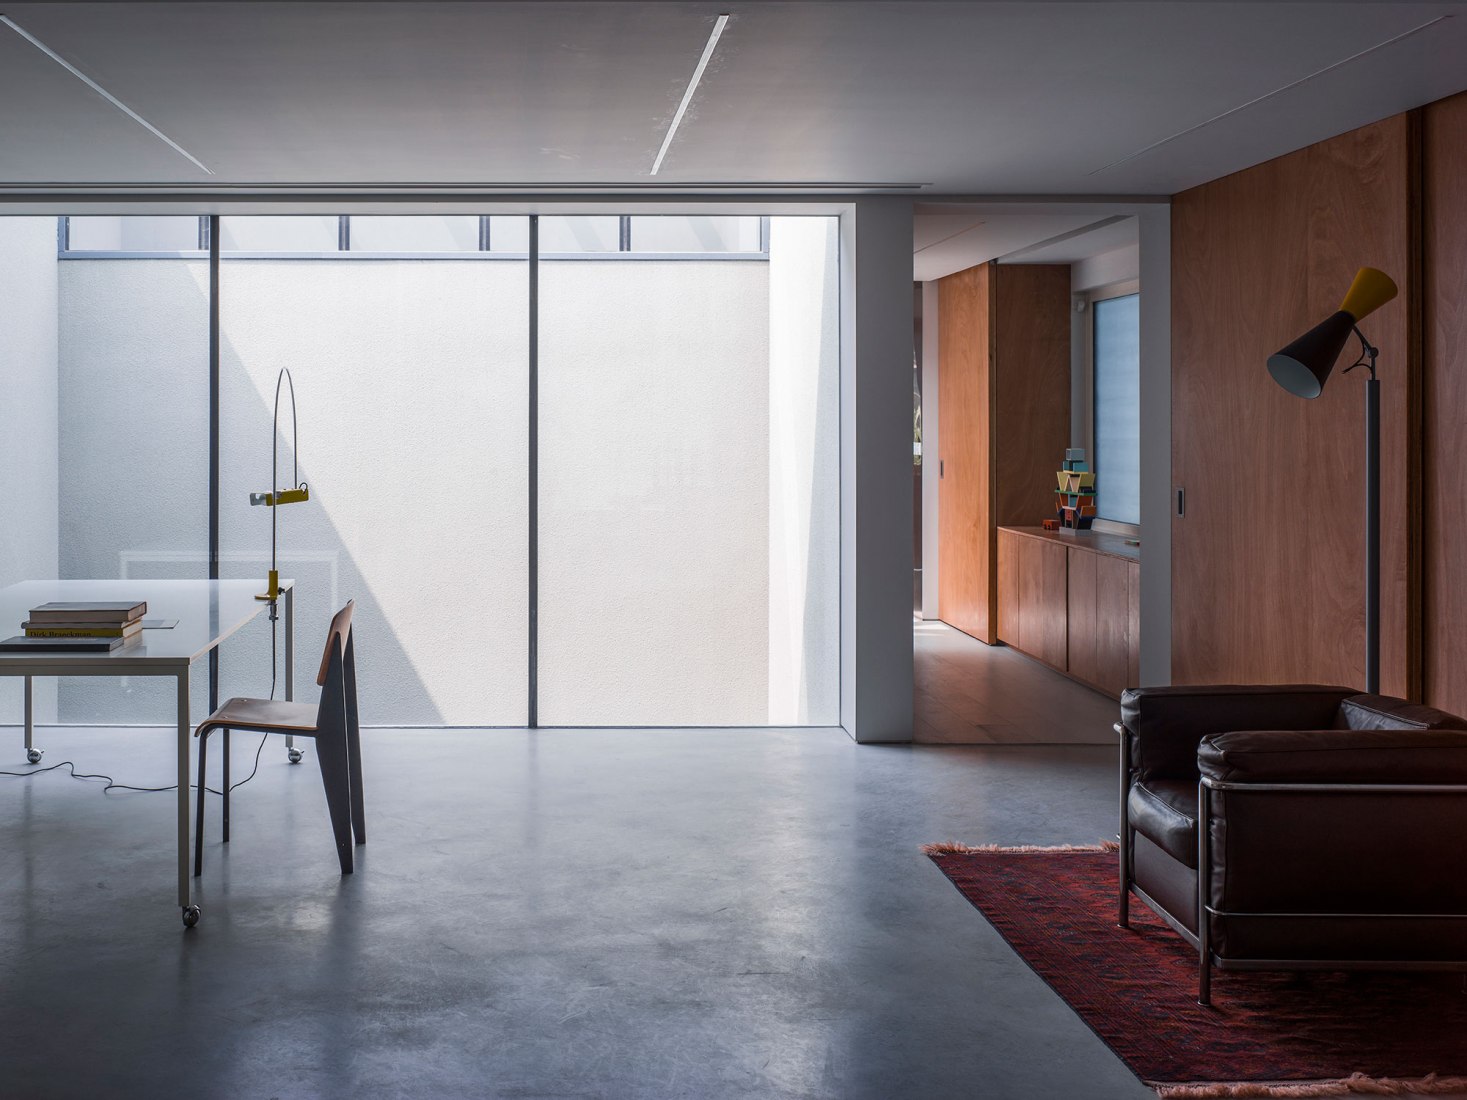 Apartment 55 by Atelier About Architecture. Photograph by Haiting Sun.